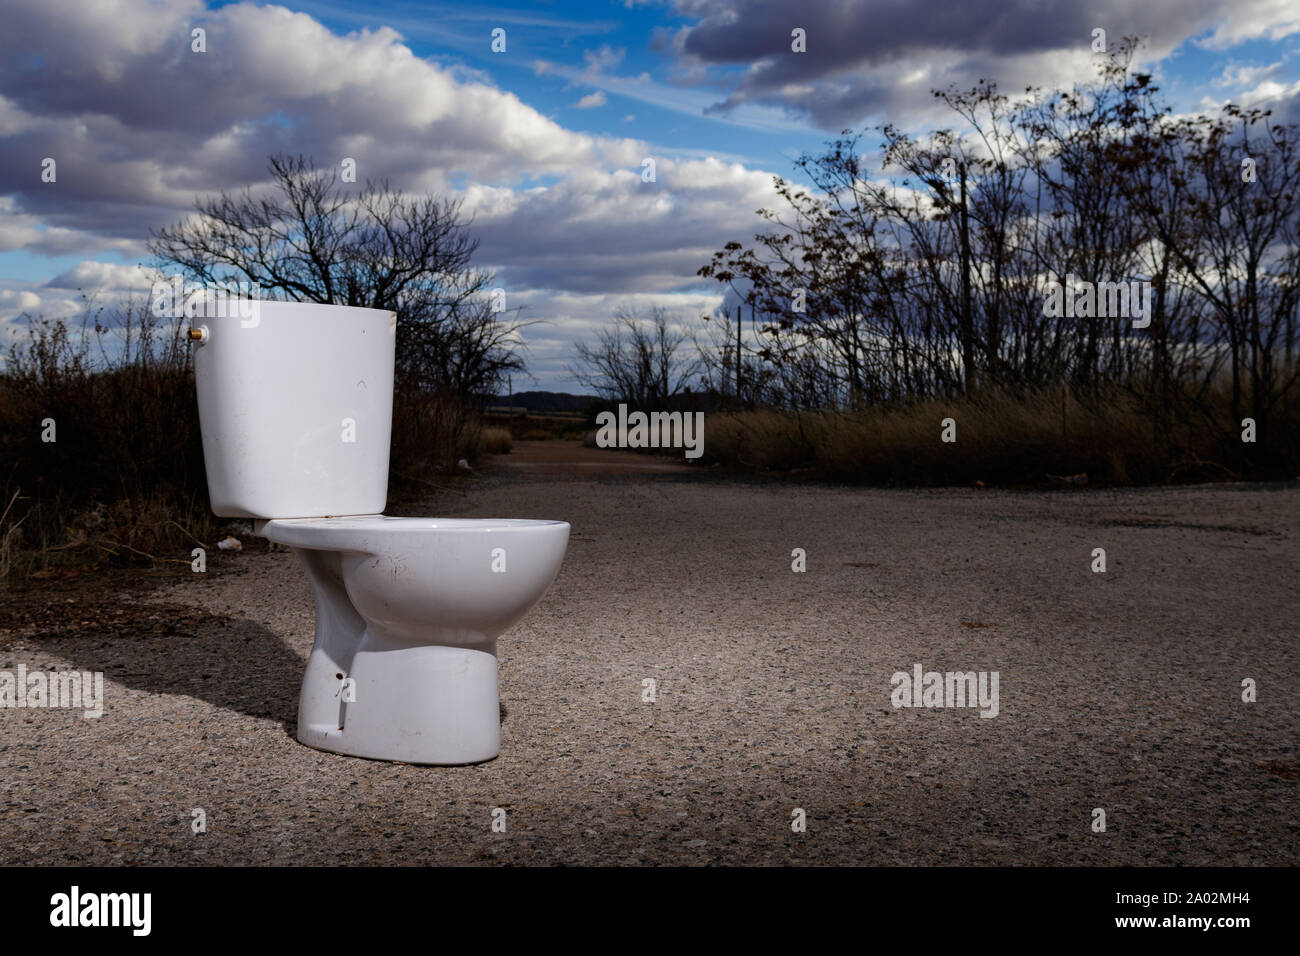 White toilet dumped on a rural road in Spain Stock Photo